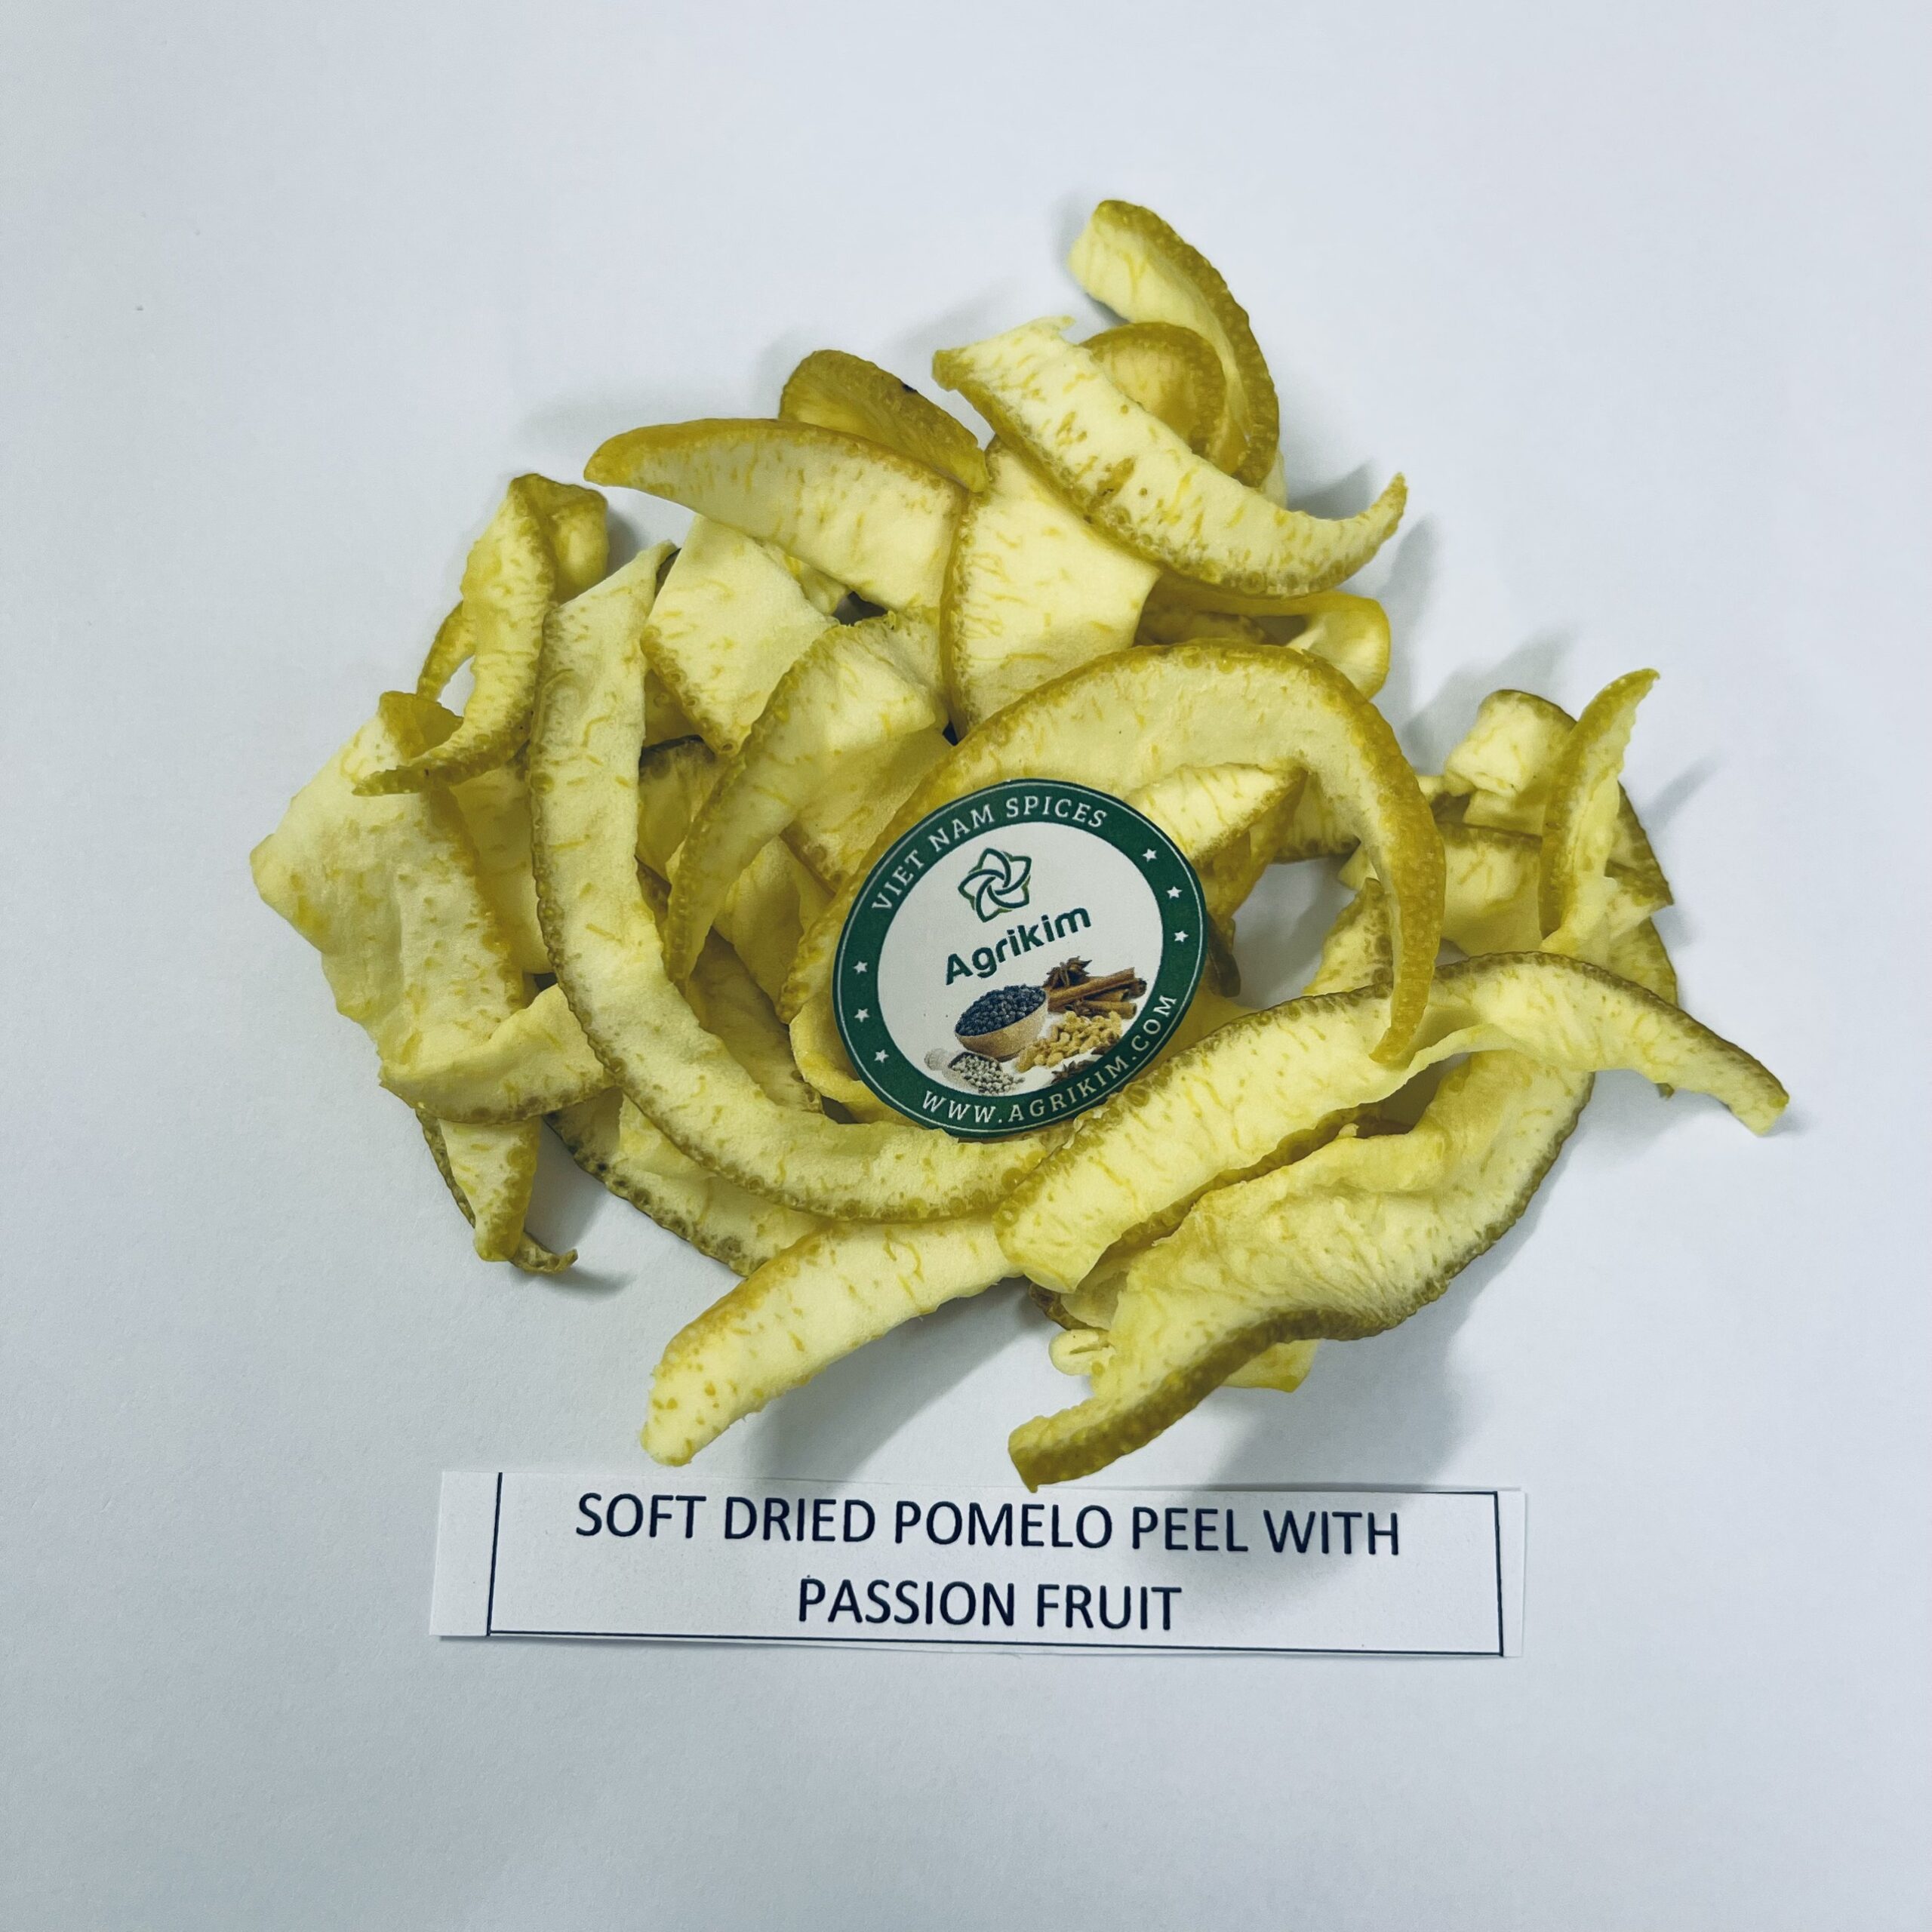 Soft Dried Pomelo Peel With Passion Fruit